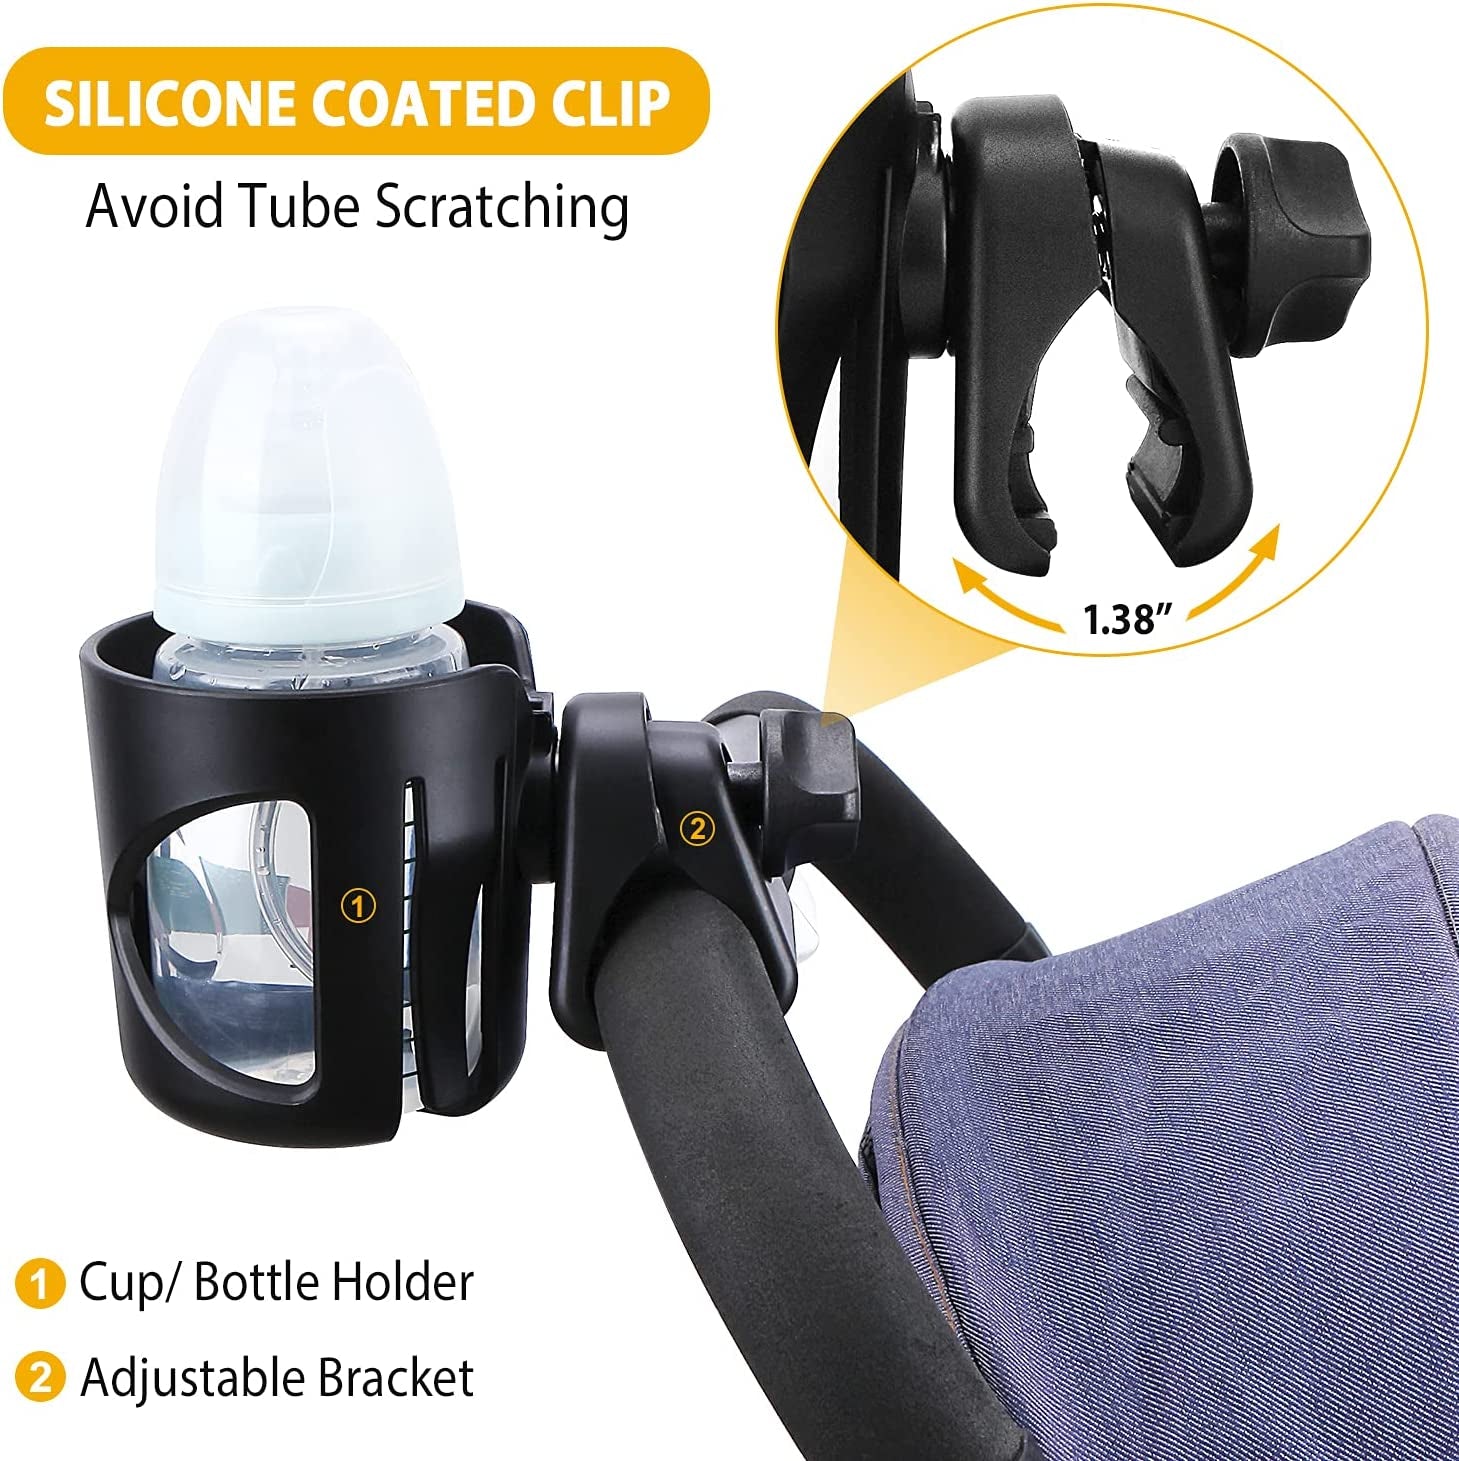 Stroller Cup Holder, Universal Drink Holder for Bikes, Trolleys or Walkers, Fits Most Cups